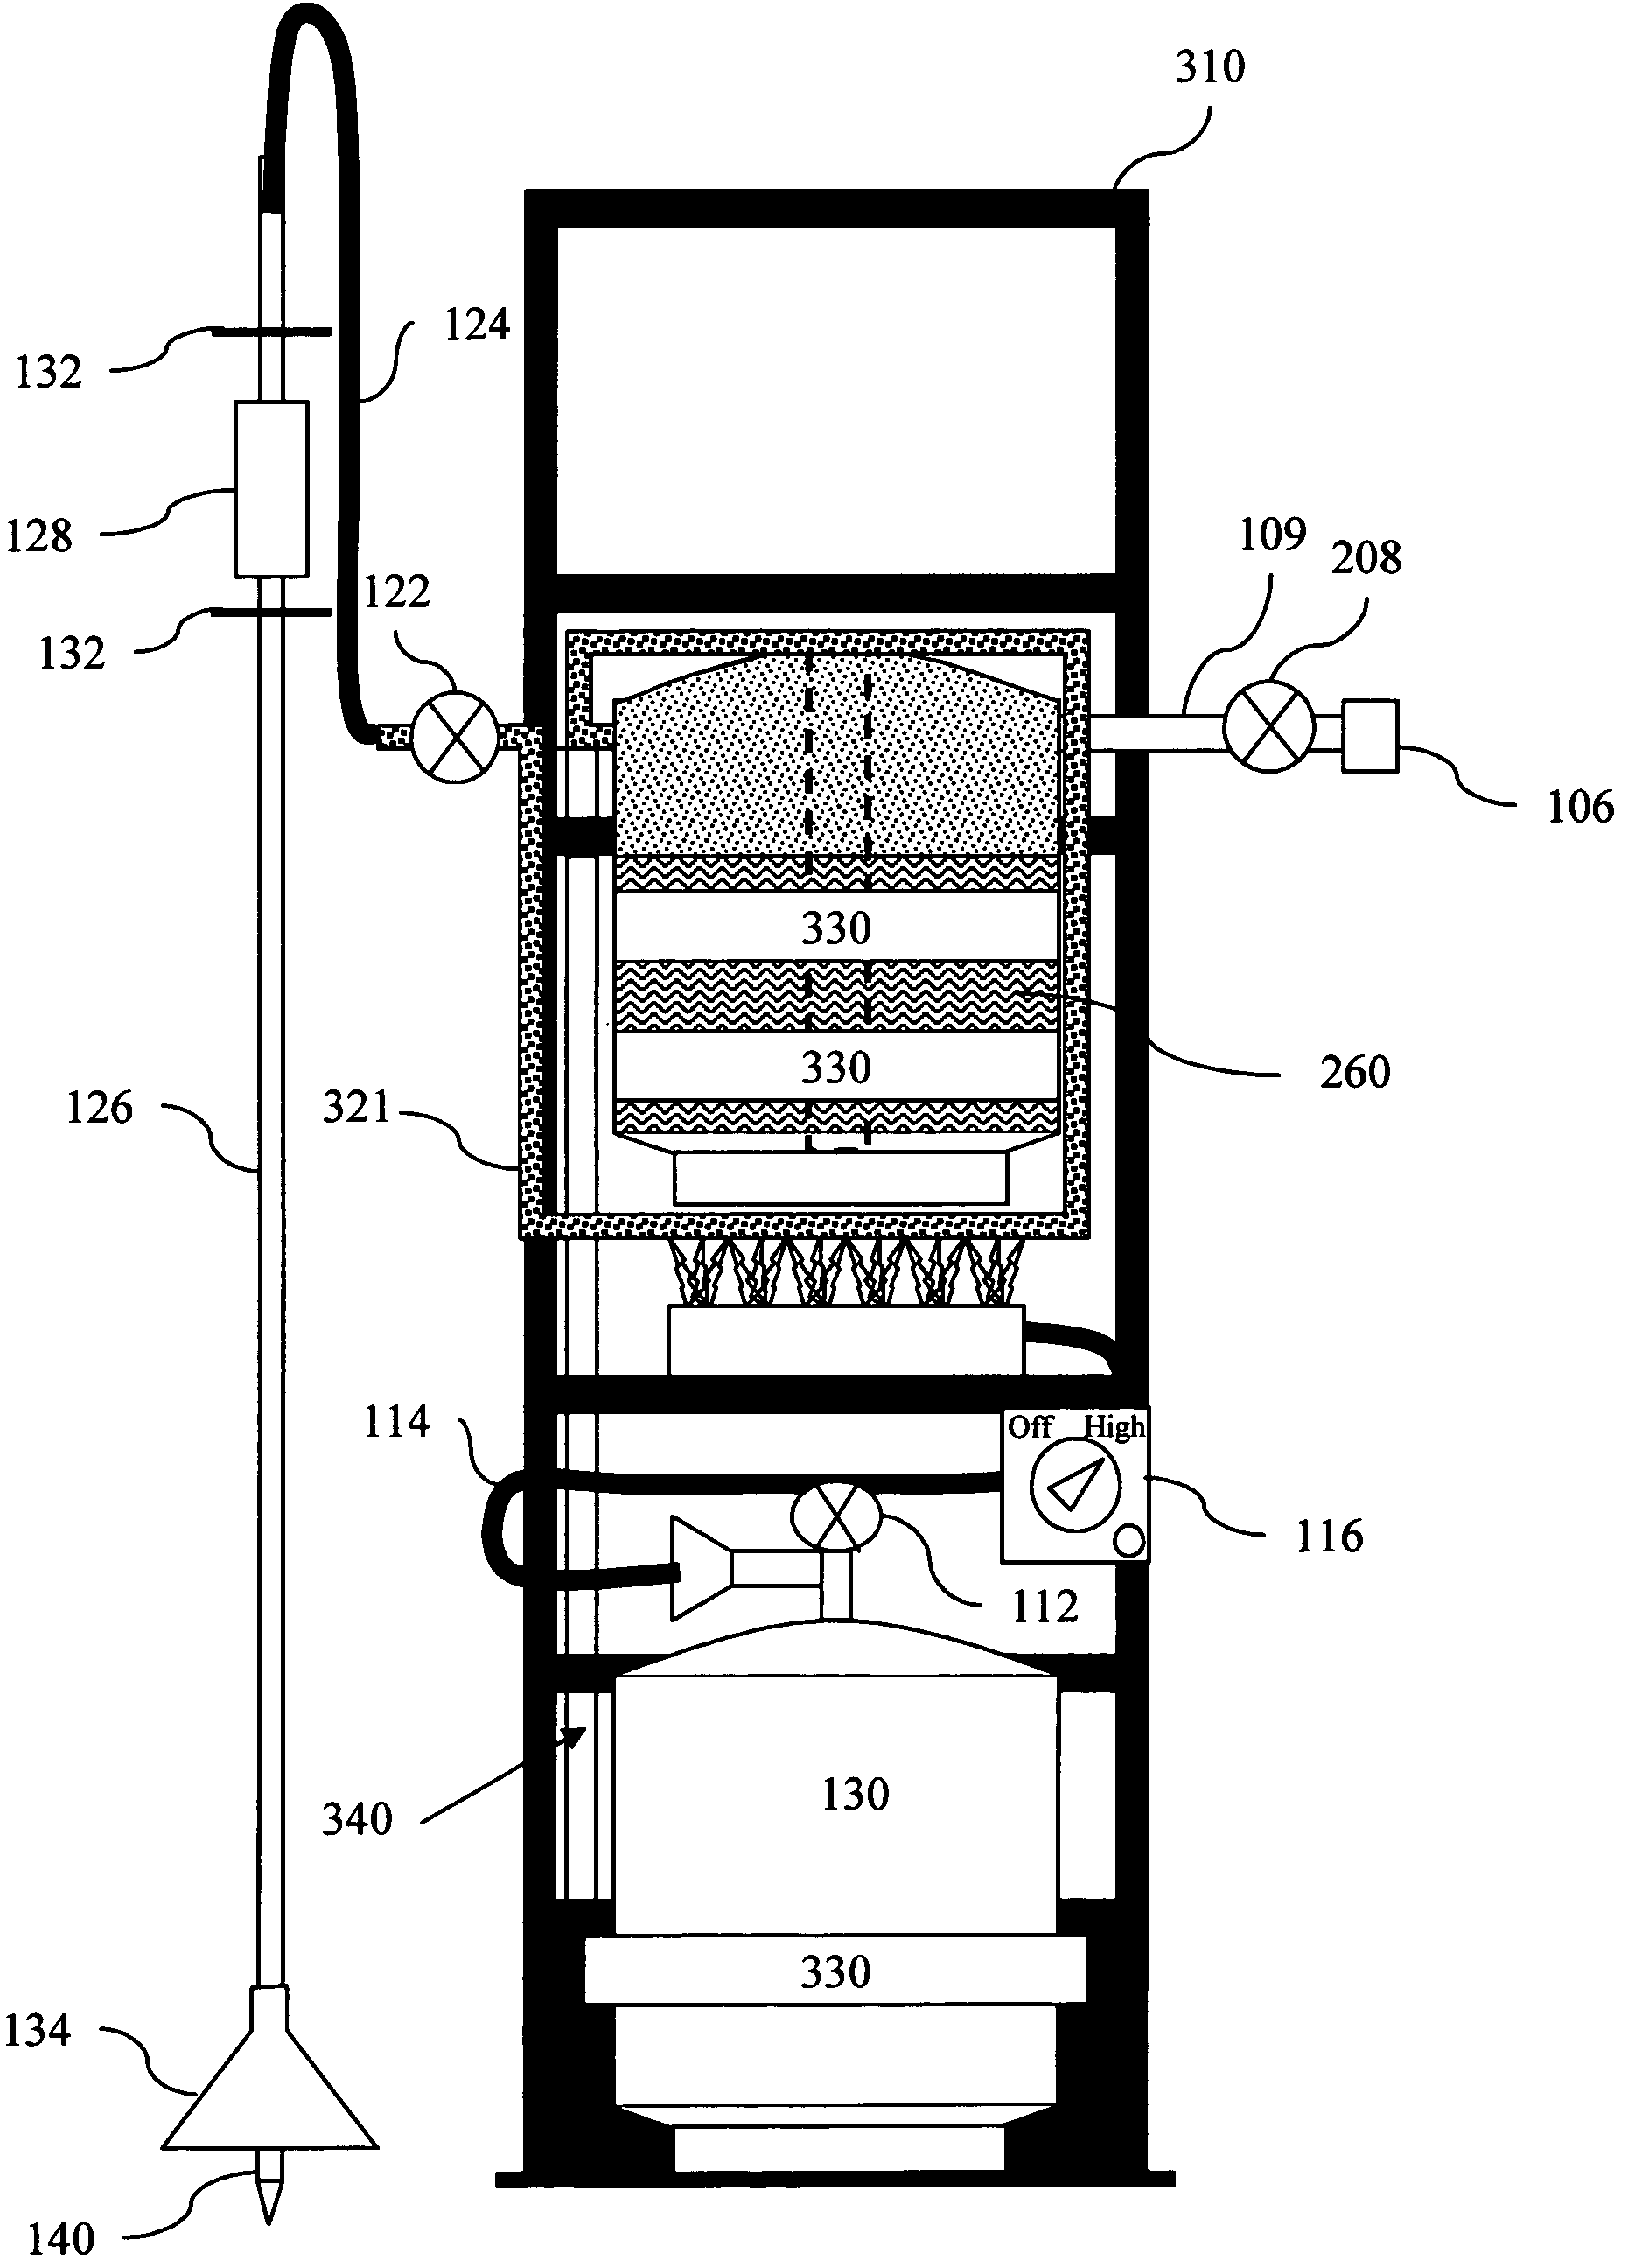 Fire ant suppression system